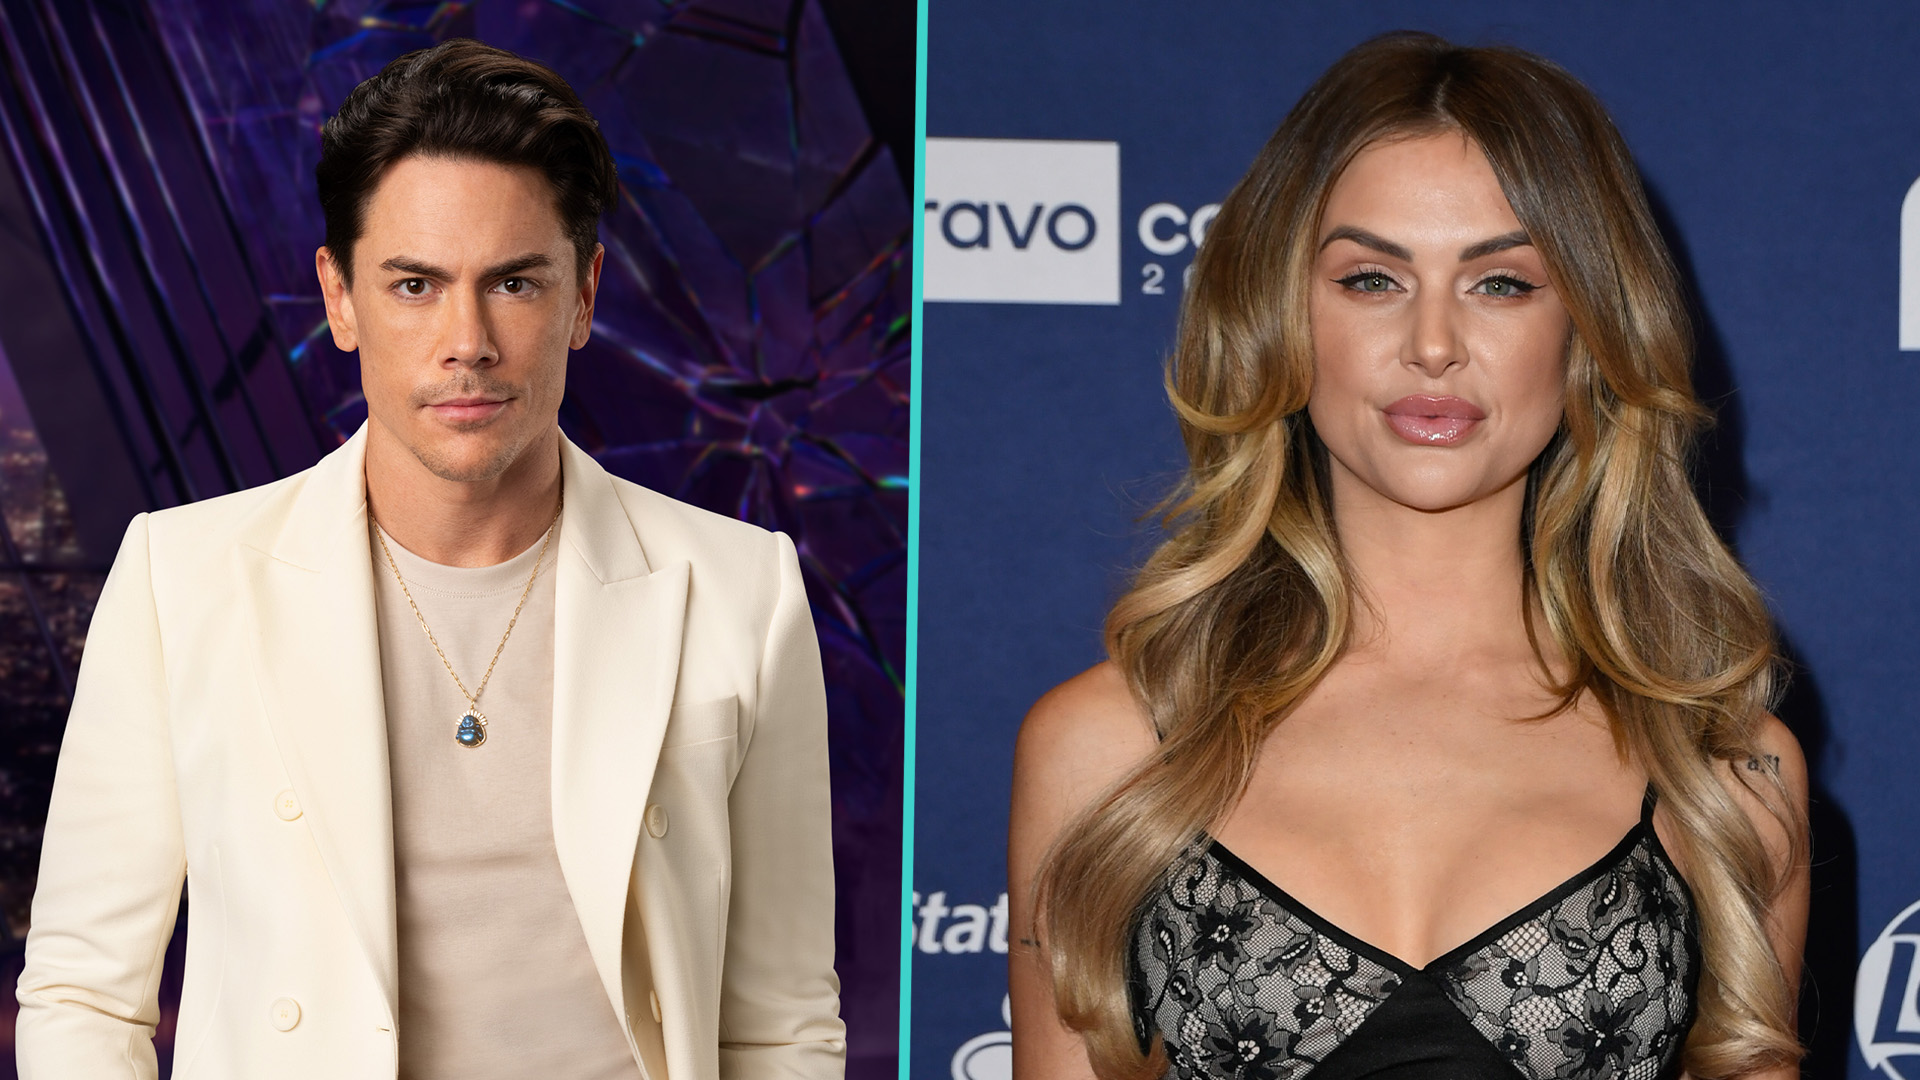 Lala Kent slams Tom Sandoval for 'heartbreaking' photos with a captive tiger  – NBC Los Angeles